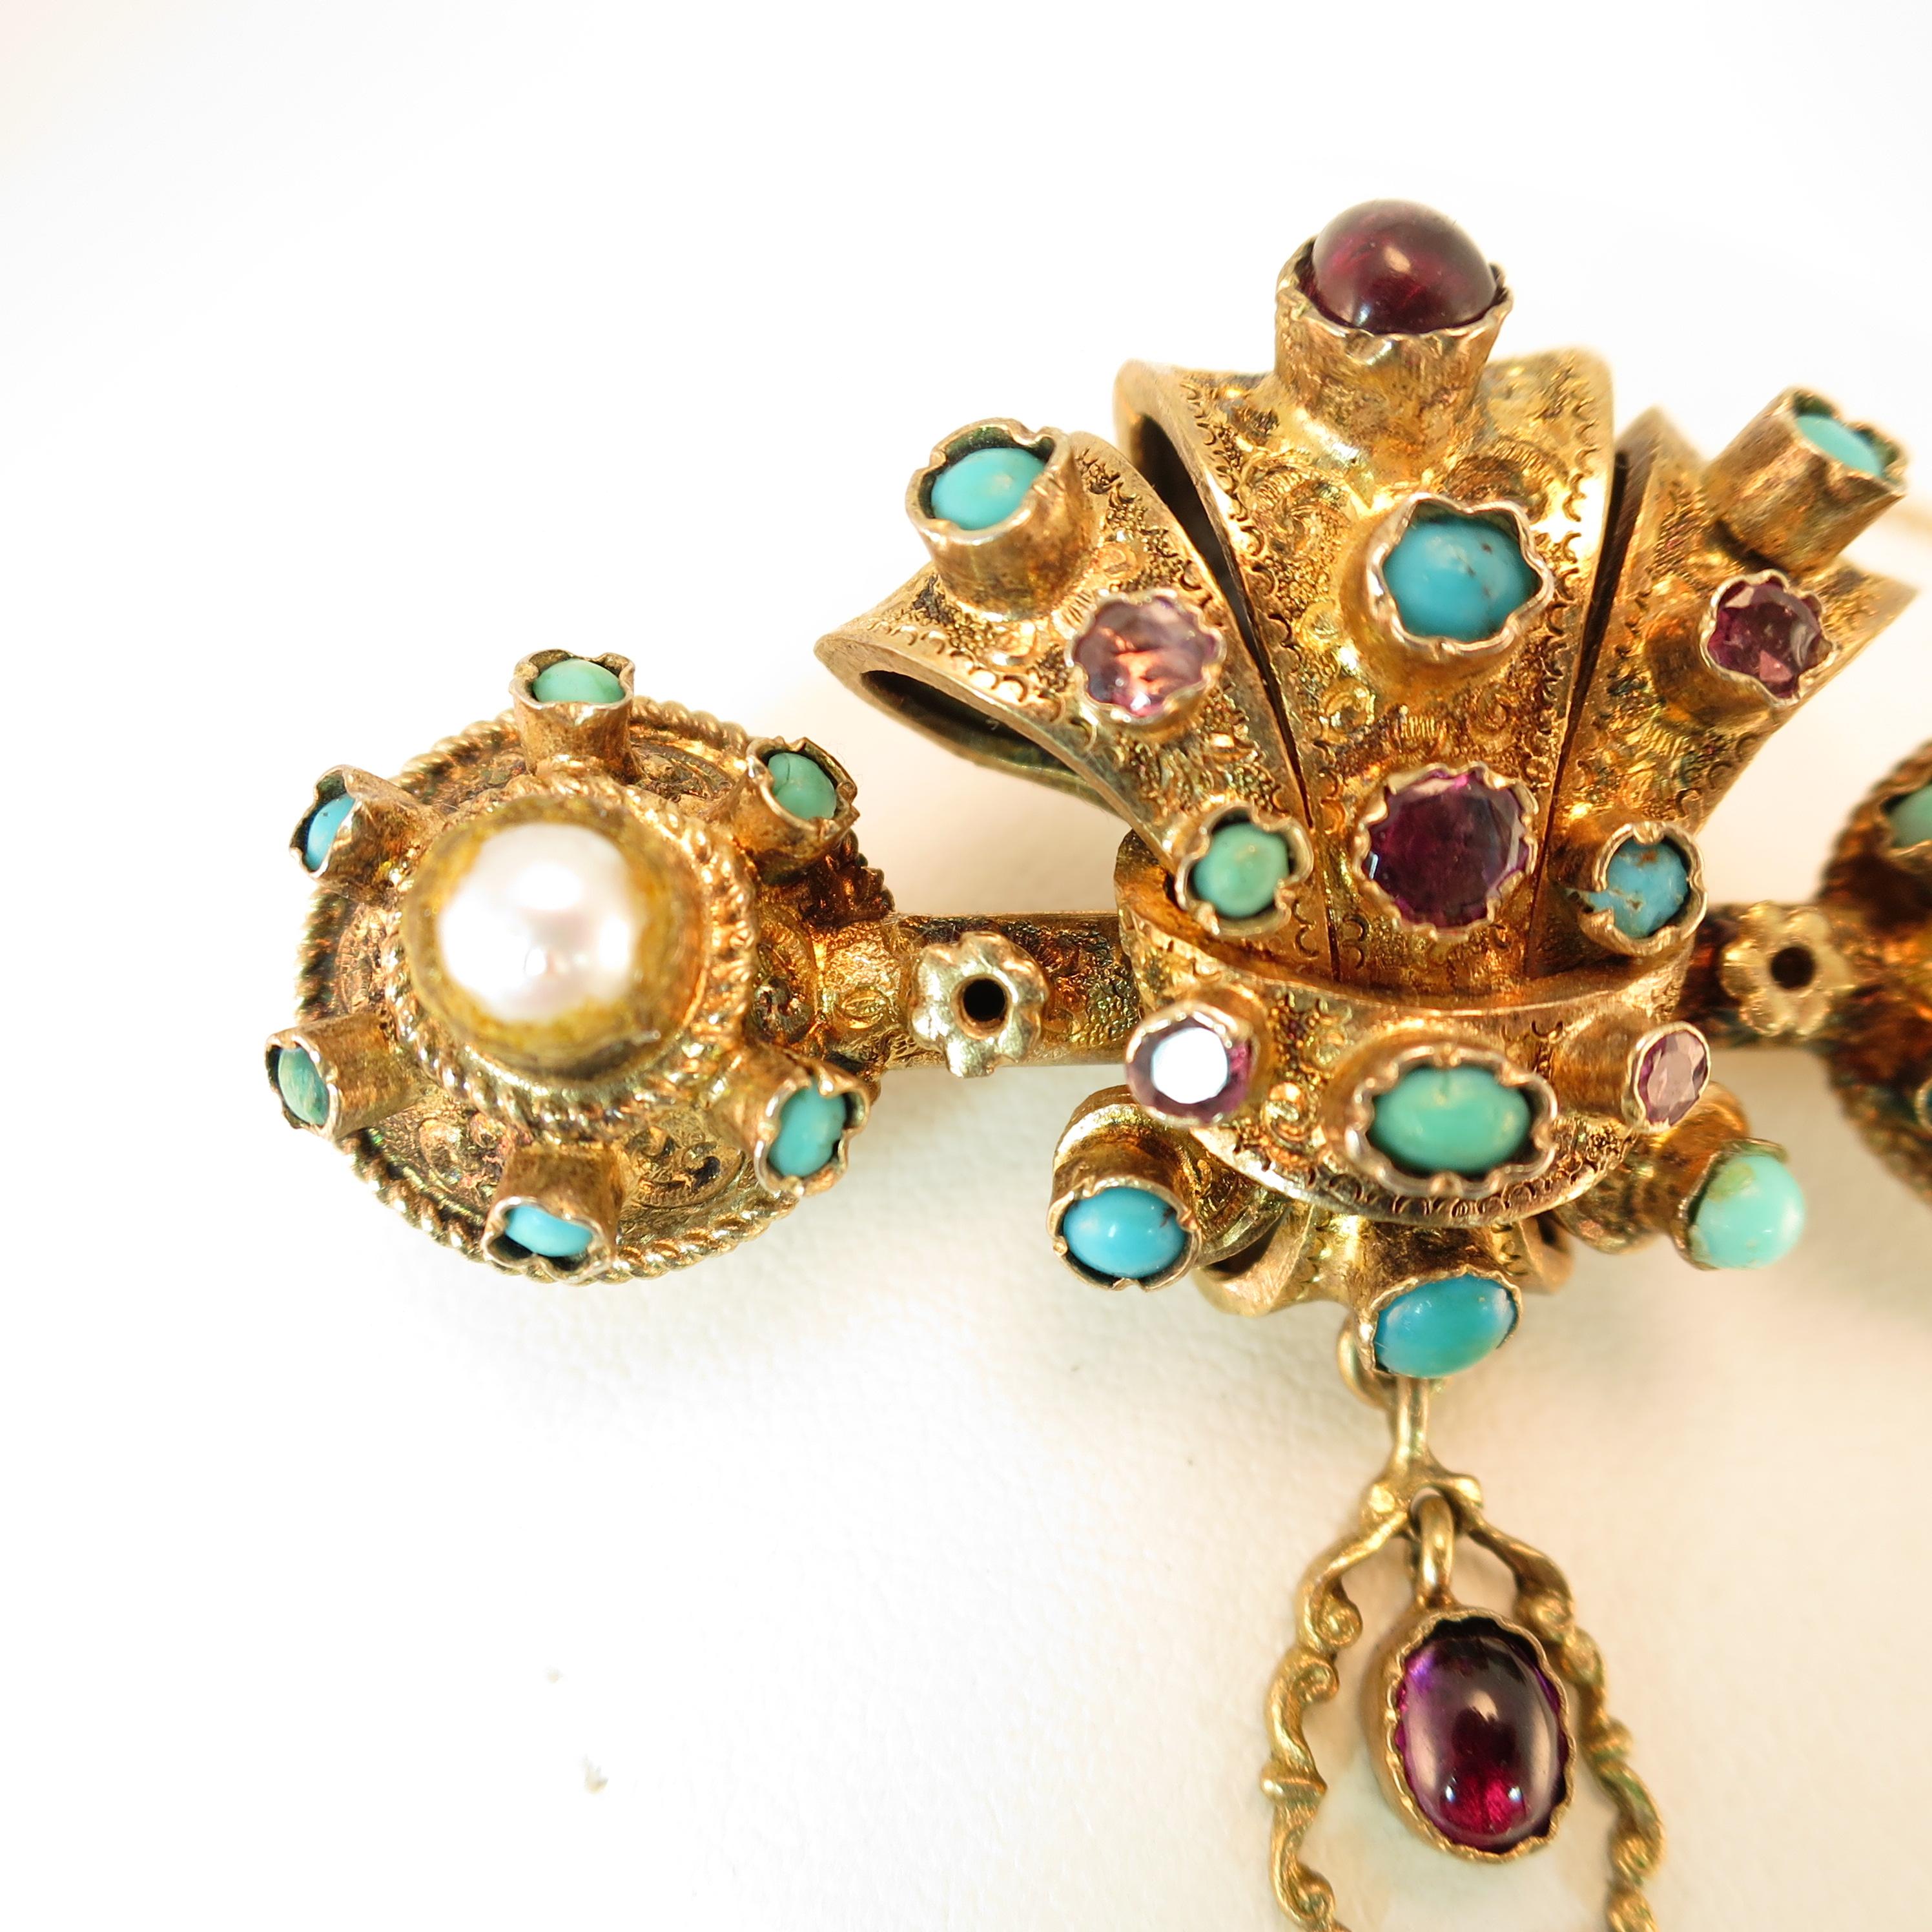 Georgian Baroque Brooch 10k Gold Amethyst Turquoise Pearls Circa 1840 In Good Condition For Sale In Burbank, CA